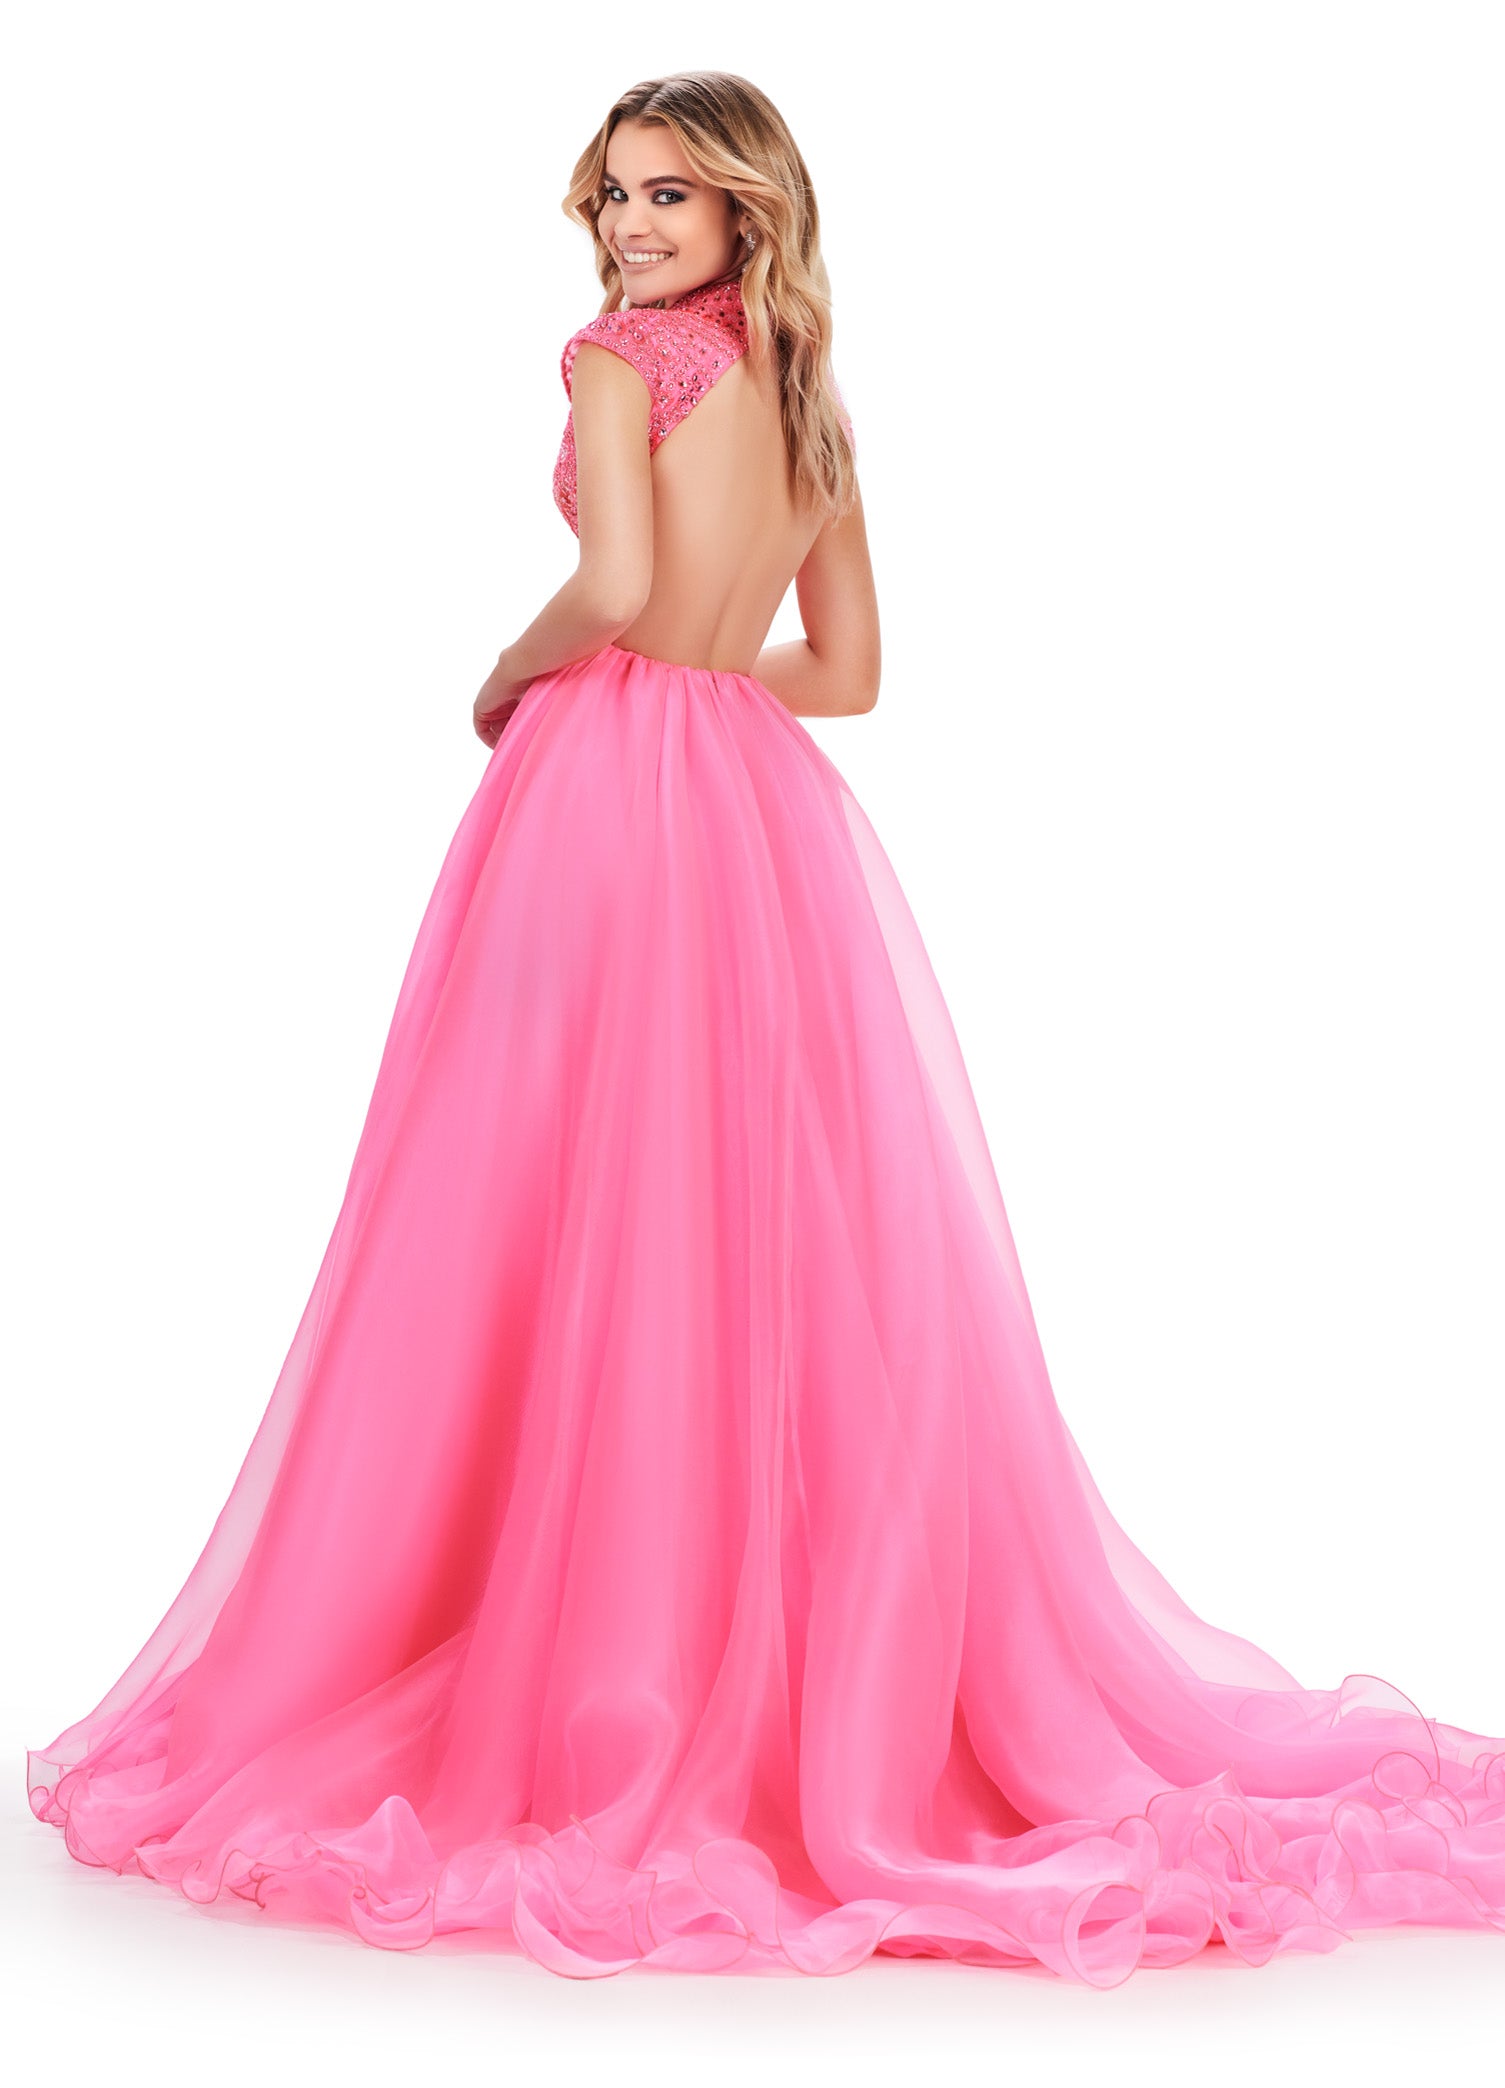 This Ashley Lauren 11630 Long Prom Dress is a stunning high neck organza ball gown with elegant cap sleeves. Perfect for formal events and pageants, this dress exudes sophistication and style. Made with quality materials, it offers both comfort and luxury for a truly special occasion. This organza ball gown features a fully beaded bodice with cap sleeves and a high neckline. The open back makes this dress extra fabulous!